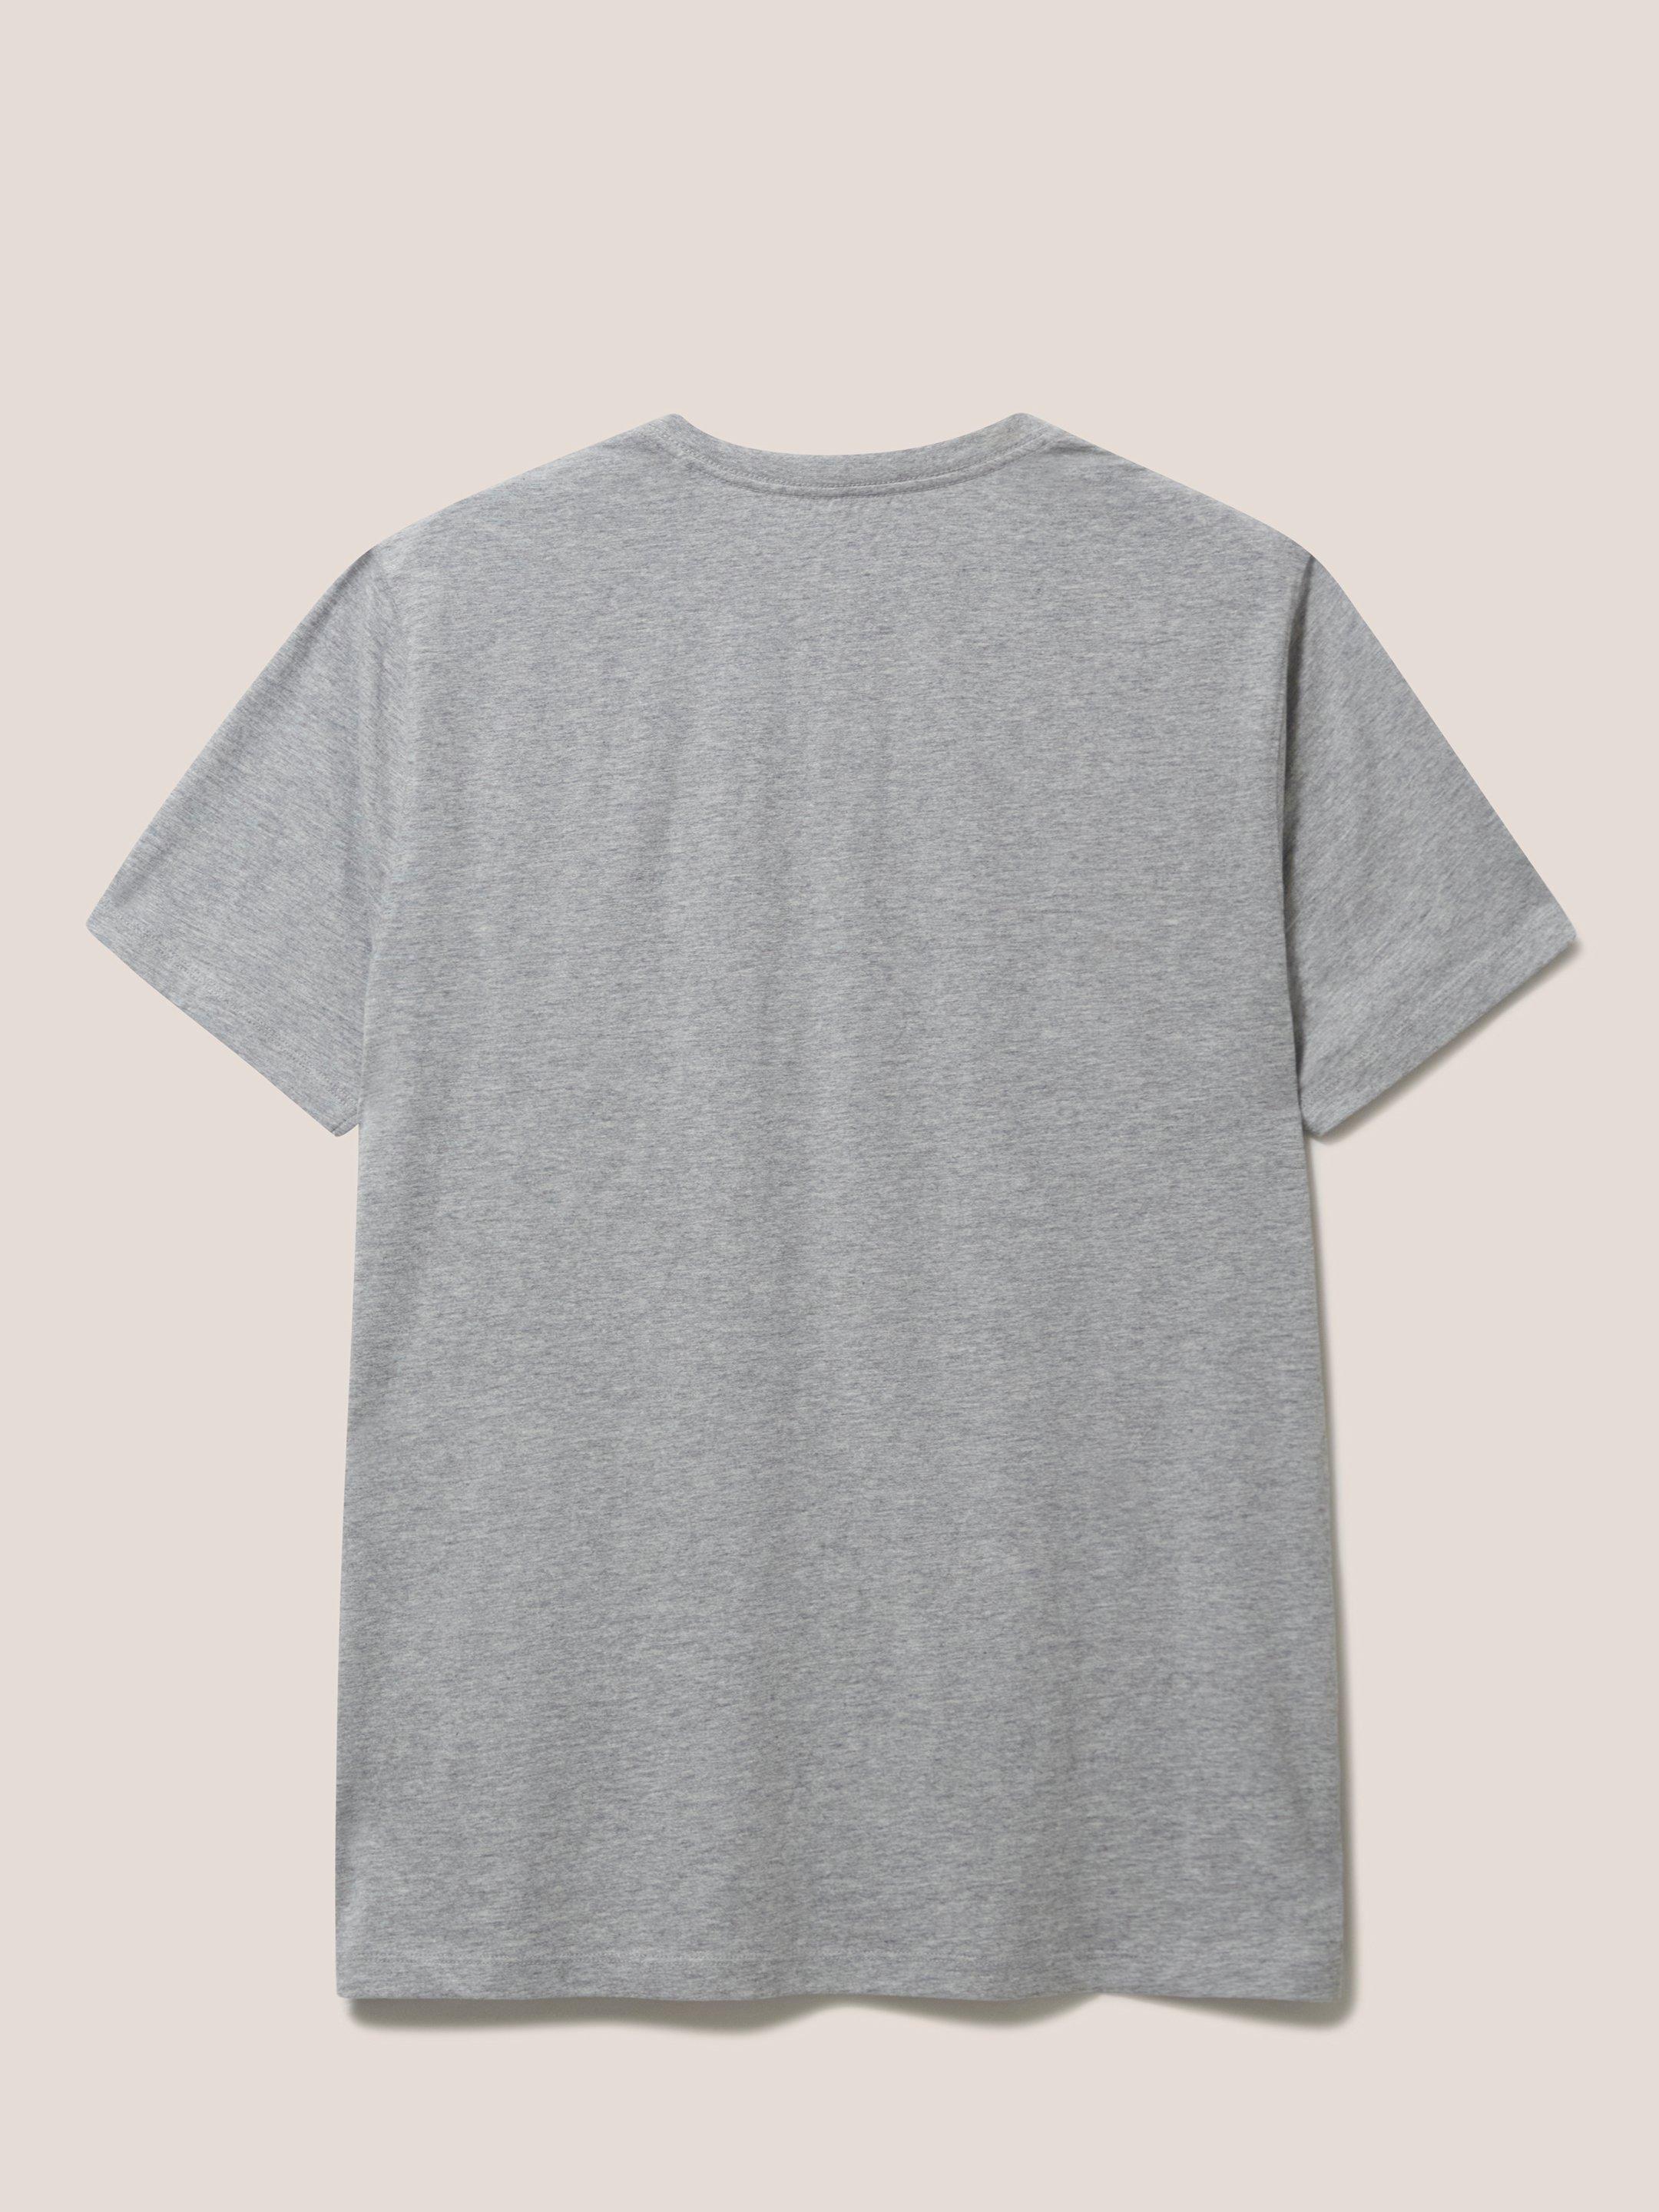 Sunset Surf Graphic Tee in GREY MARL - FLAT BACK